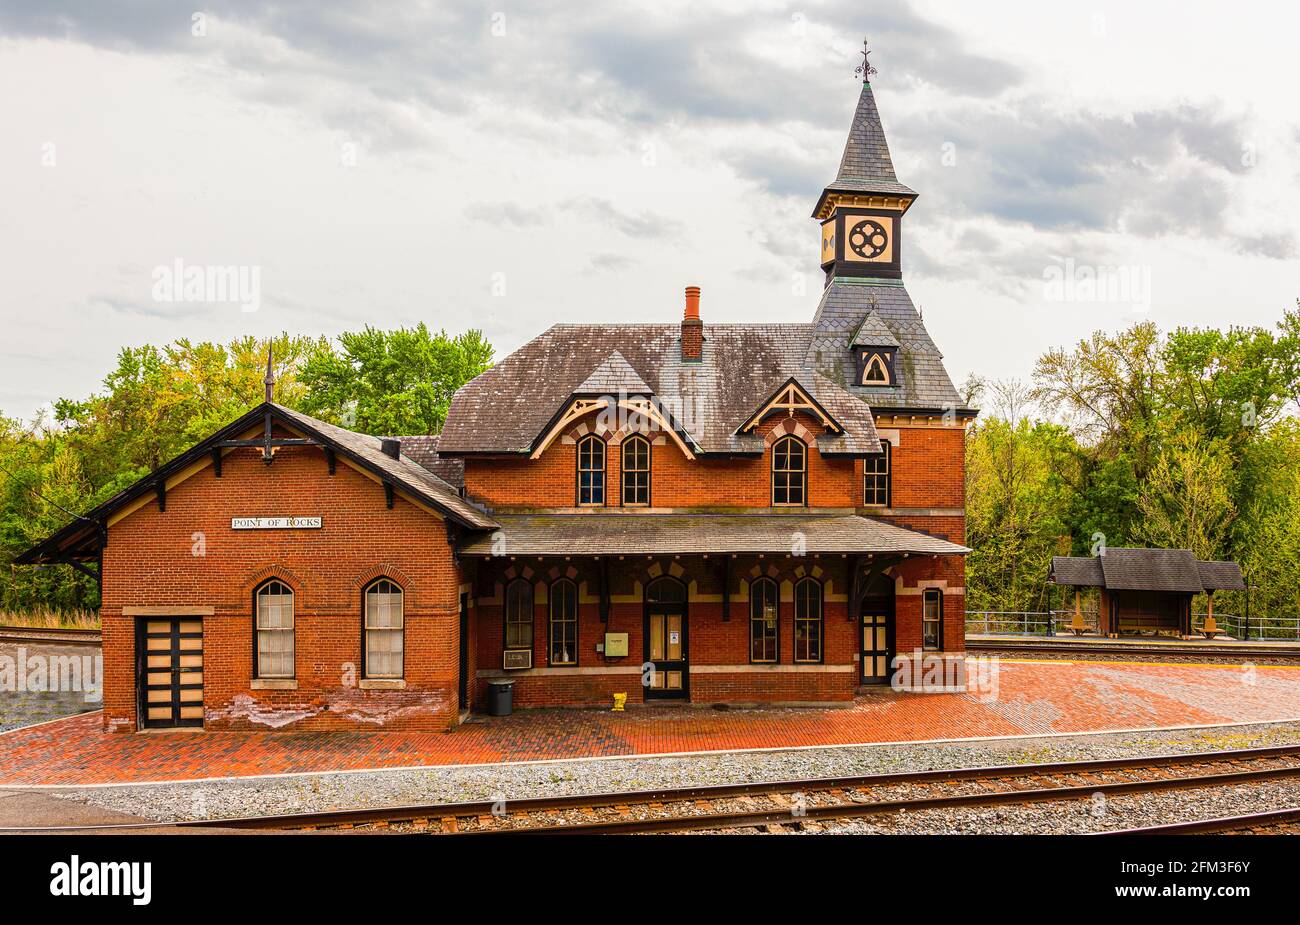 Point of Rocks is a small town on the border of Virginia and Maryland, with historic buildings. Footage shows historic brick railway station build in Stock Photo